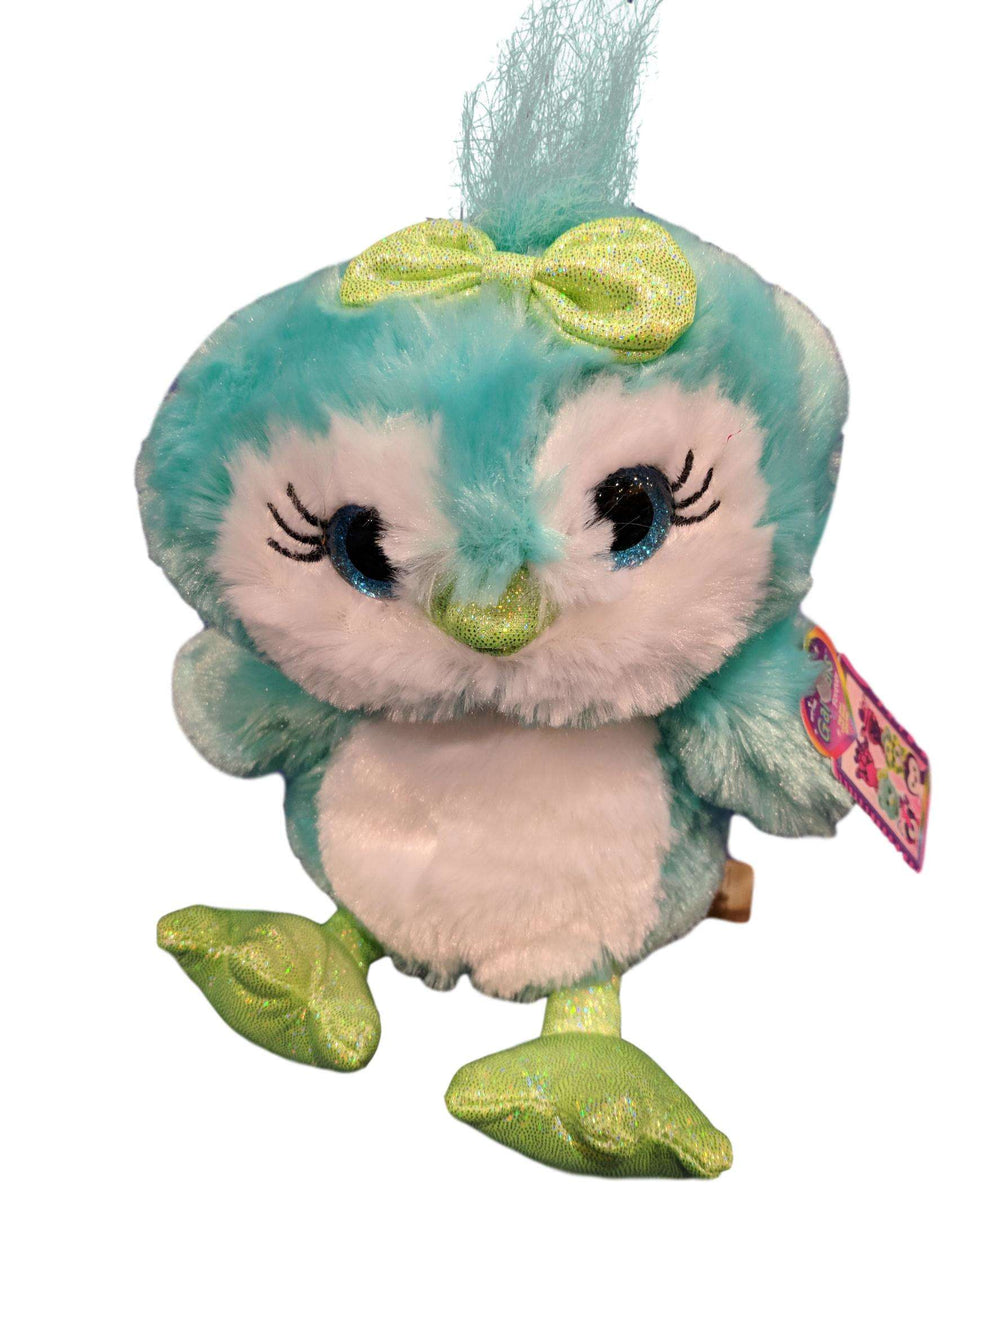 Designs by MyUtopia Shout Out:Teal Owl 7-inch Plush Stuffed Animal Toy